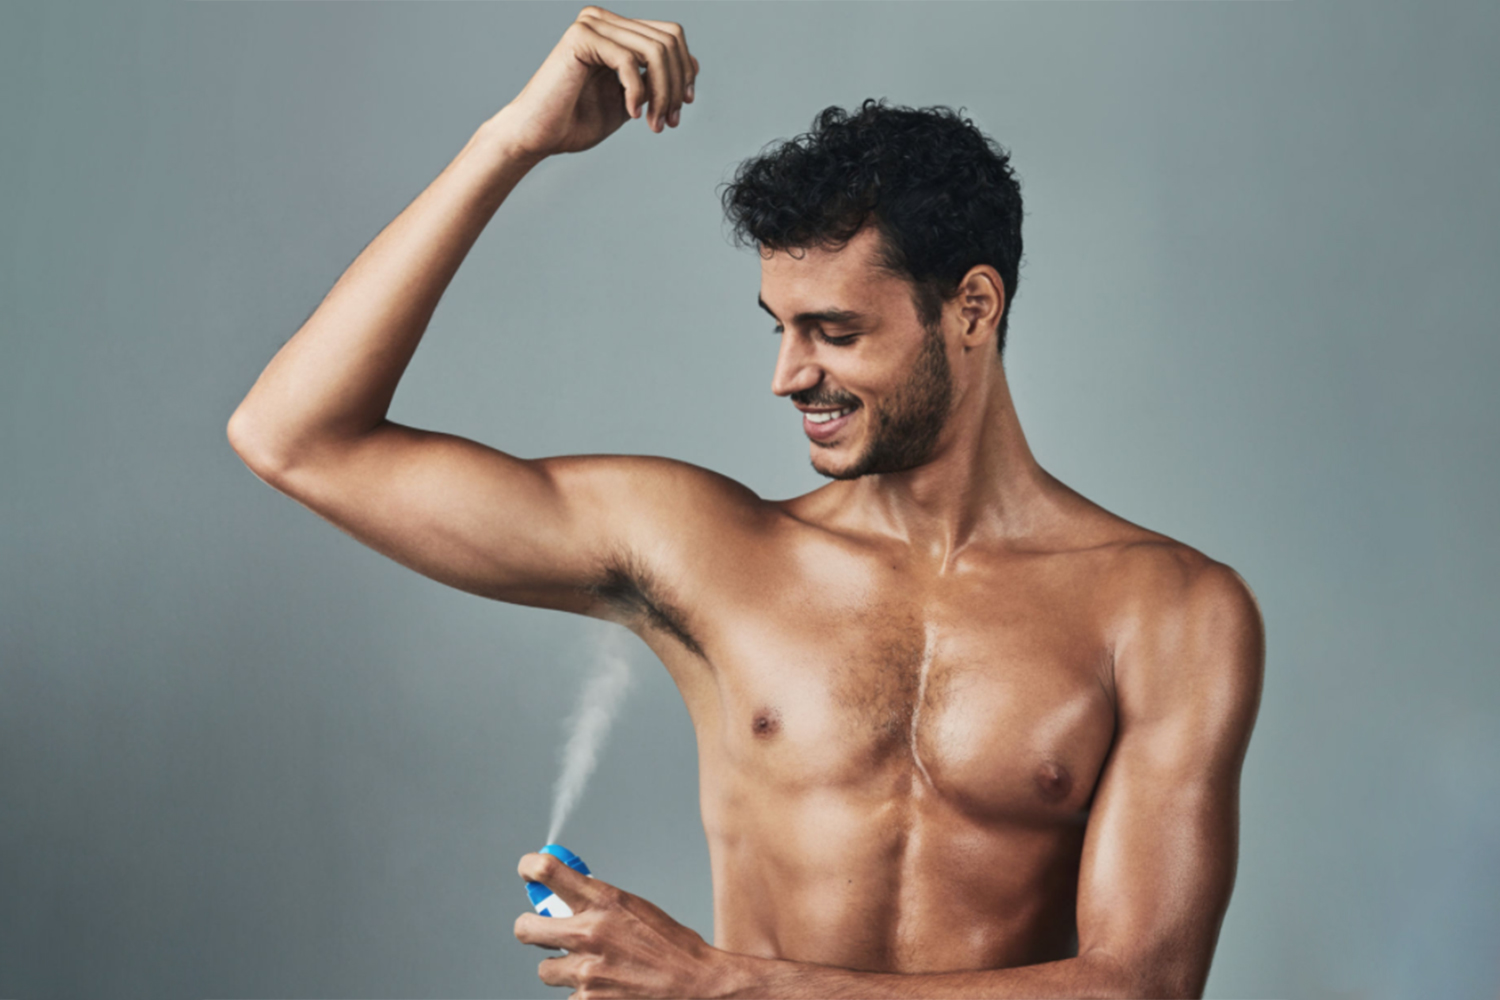 The 10 Best Men's Body Sprays To Buy in 2022 The Manual